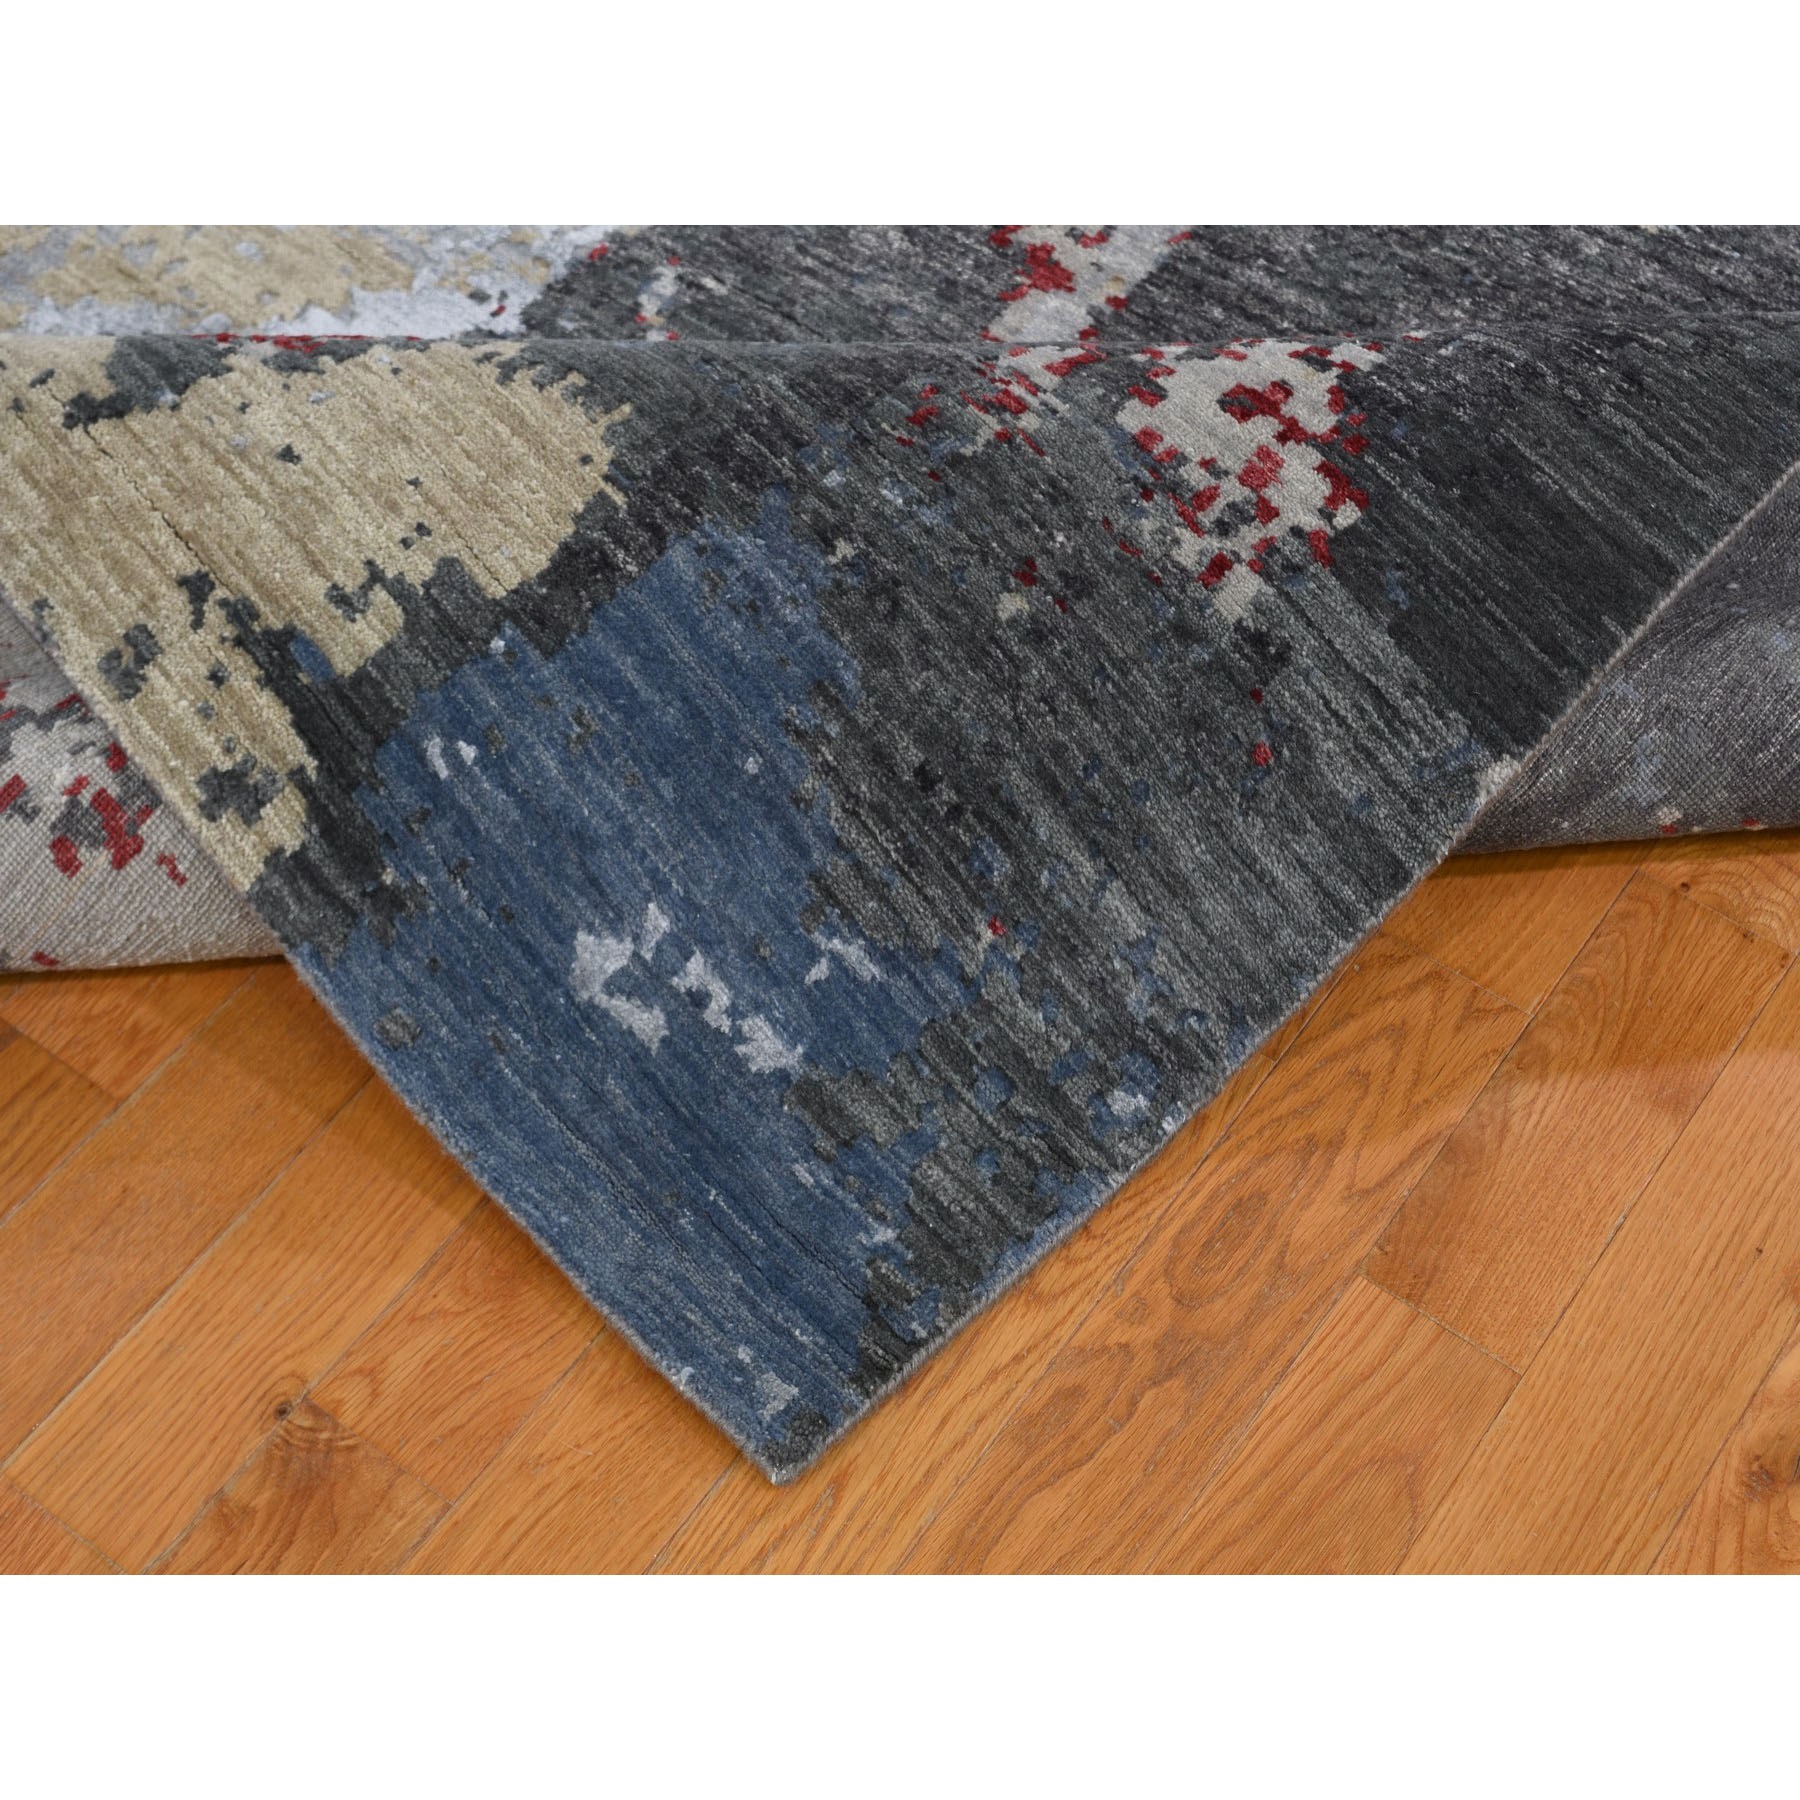 8-x10-1  Black Abstract Design Wool and Silk Hi-Low Pile Tight Knot Hand Knotted Oriental Rug 